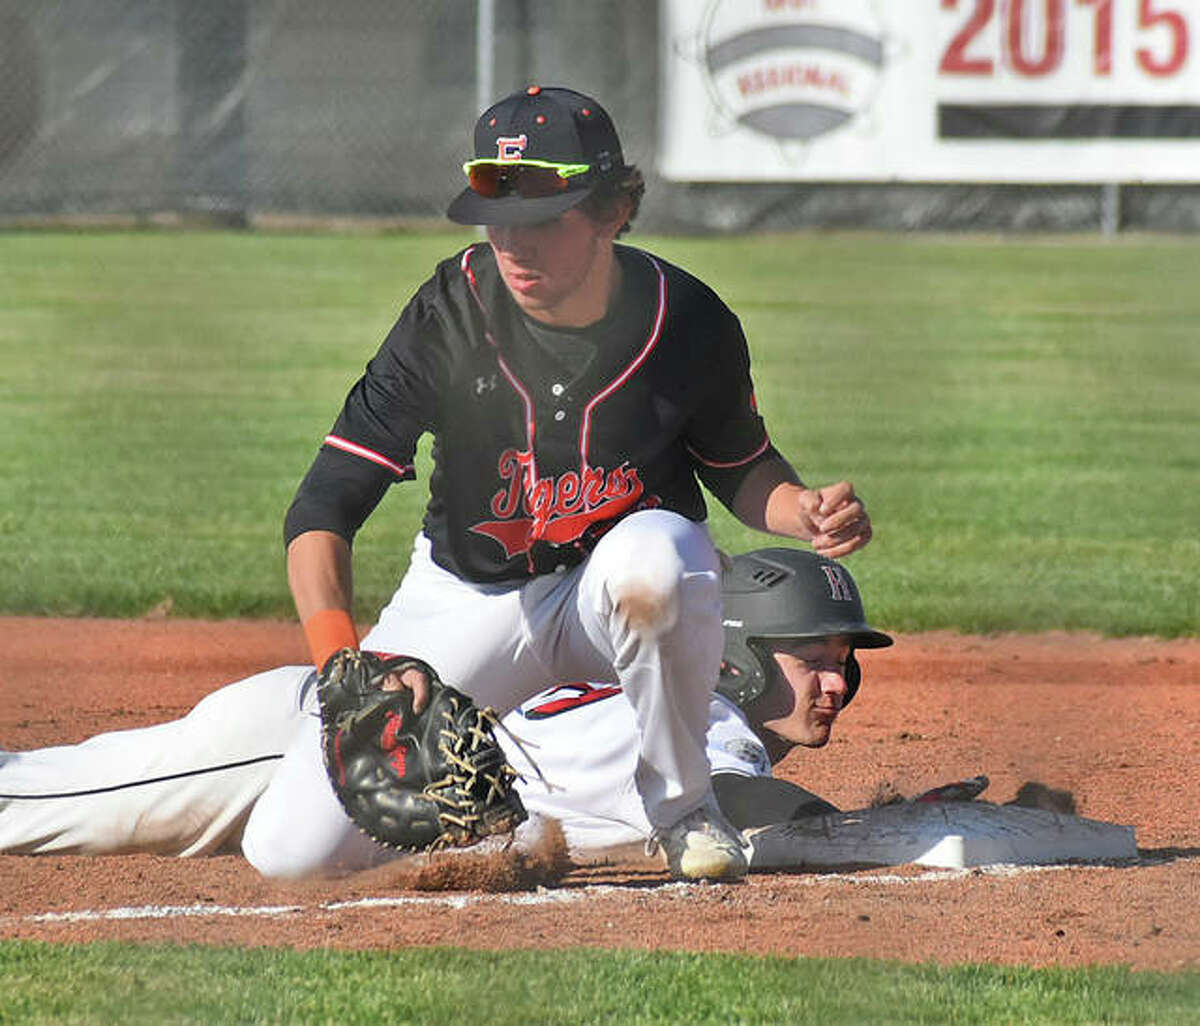 Edwardsville first baseman Riley Iffrig takes a pickoff throw while a Highland runner dives safely back to the bag during the first inning Tuesday at Glik Park in Highland.